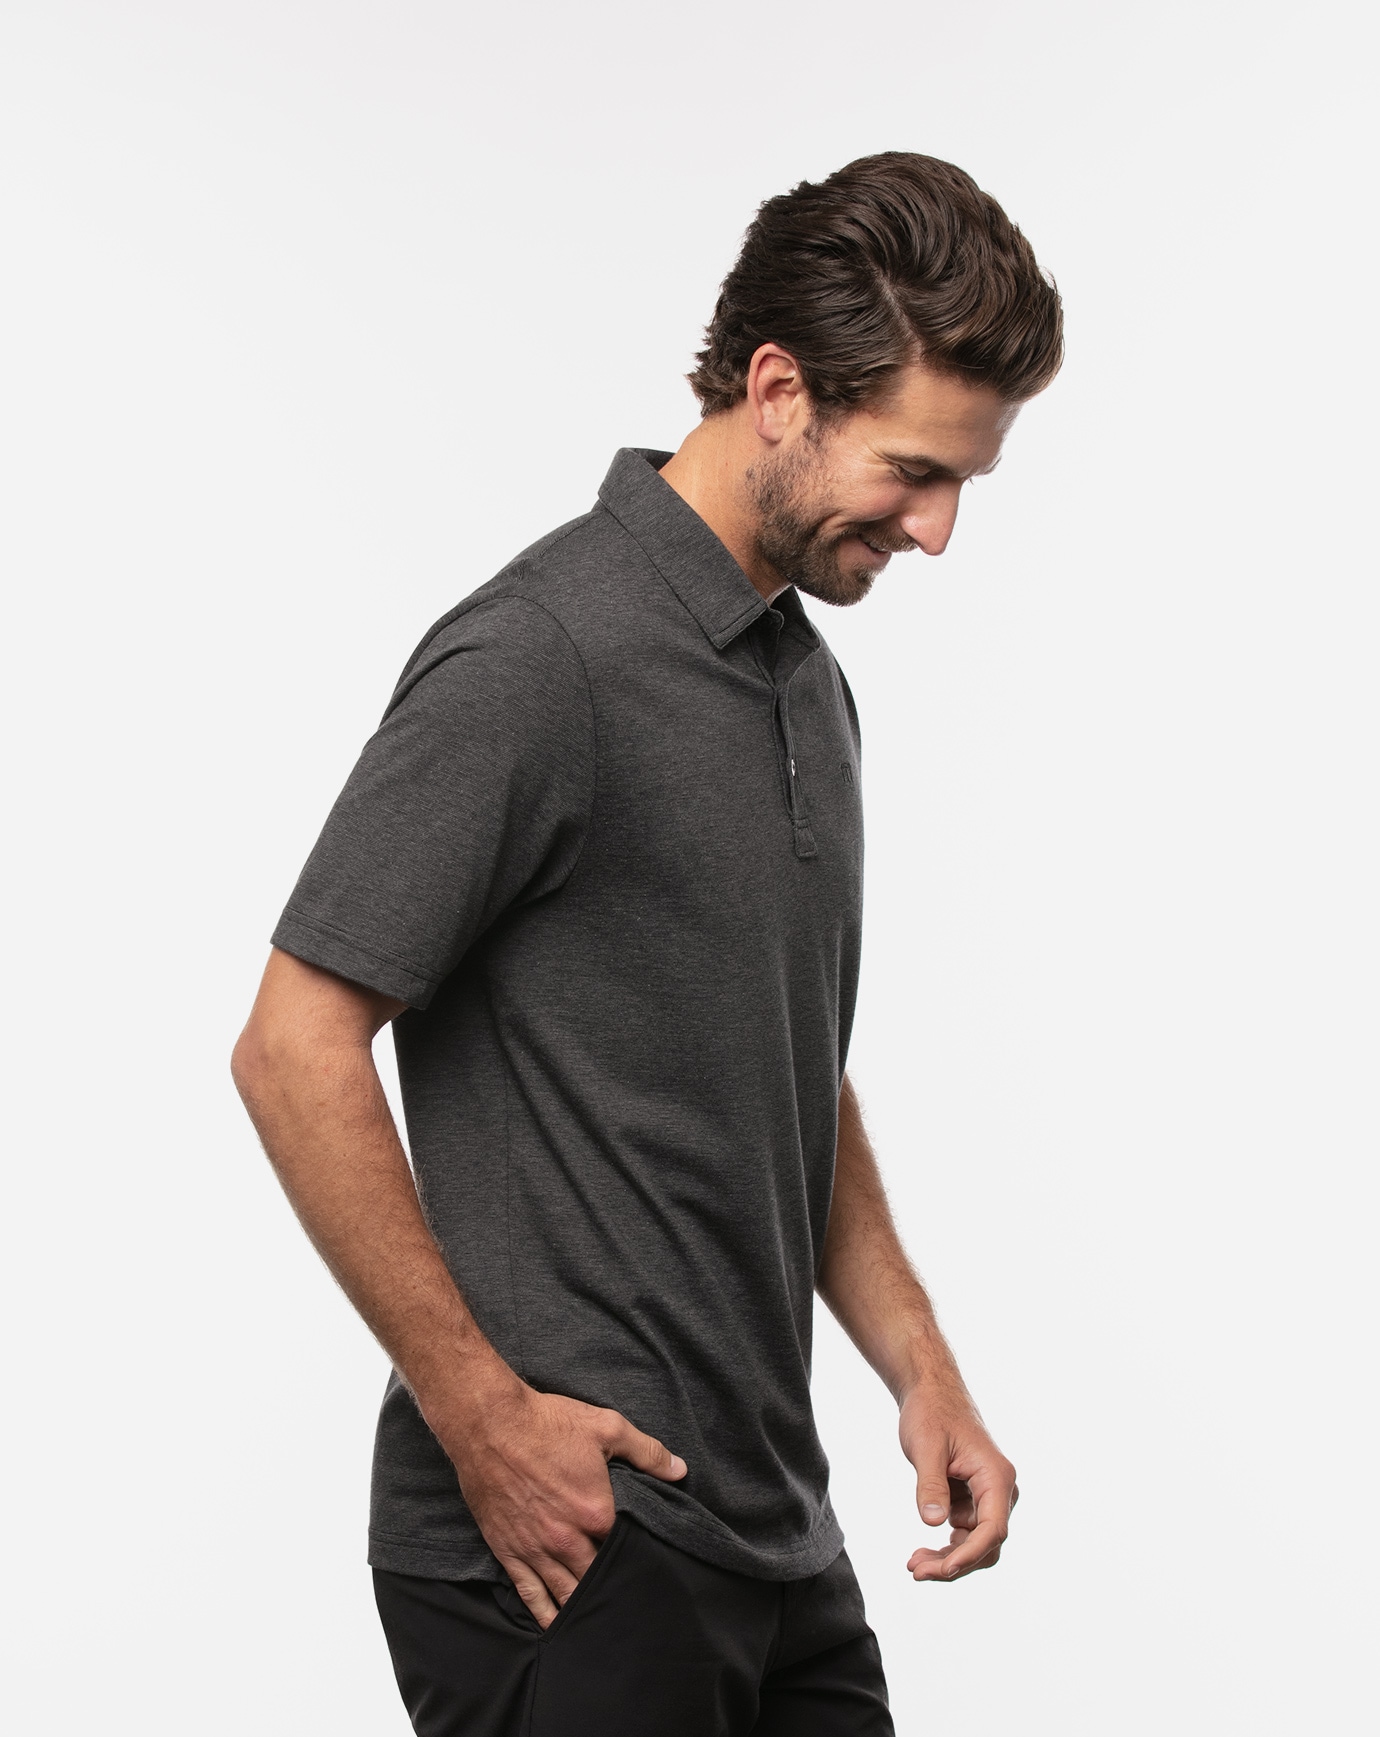 21 Long Sleeve Polo Shirts That Will Make You Look Hotter 2023